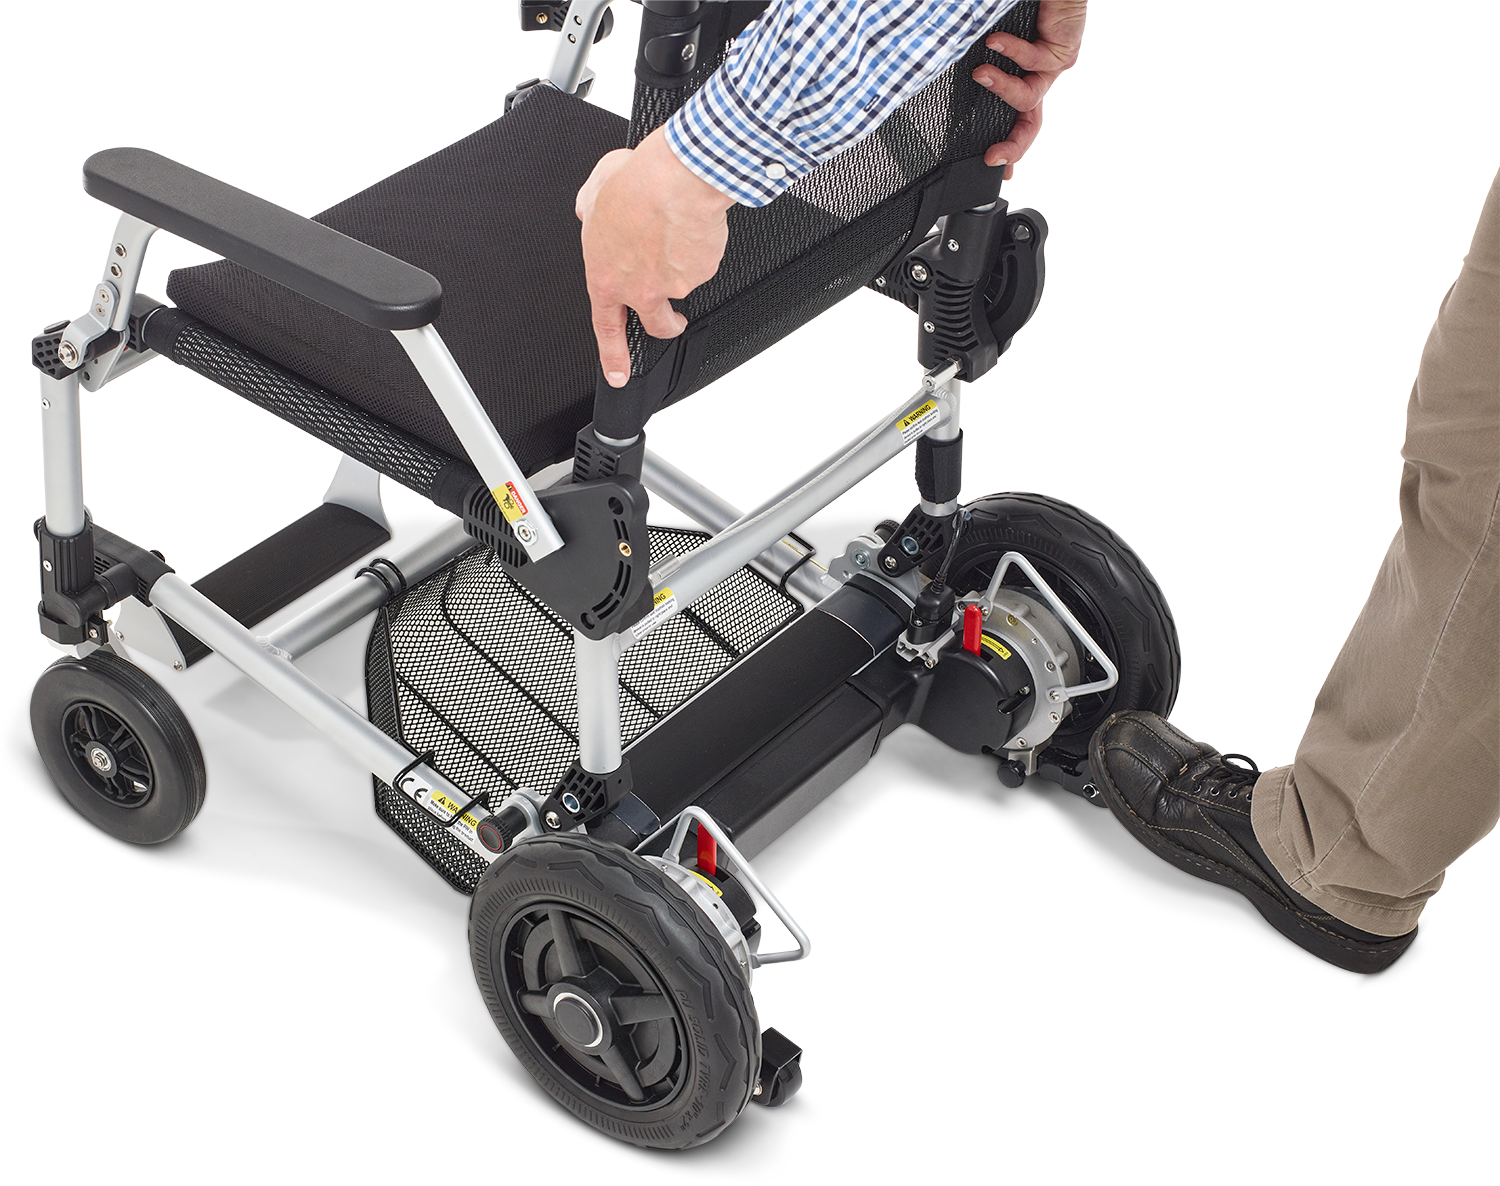 Journey - Certified Pre-owned Zoomer Folding Power Chair One-Handed Control